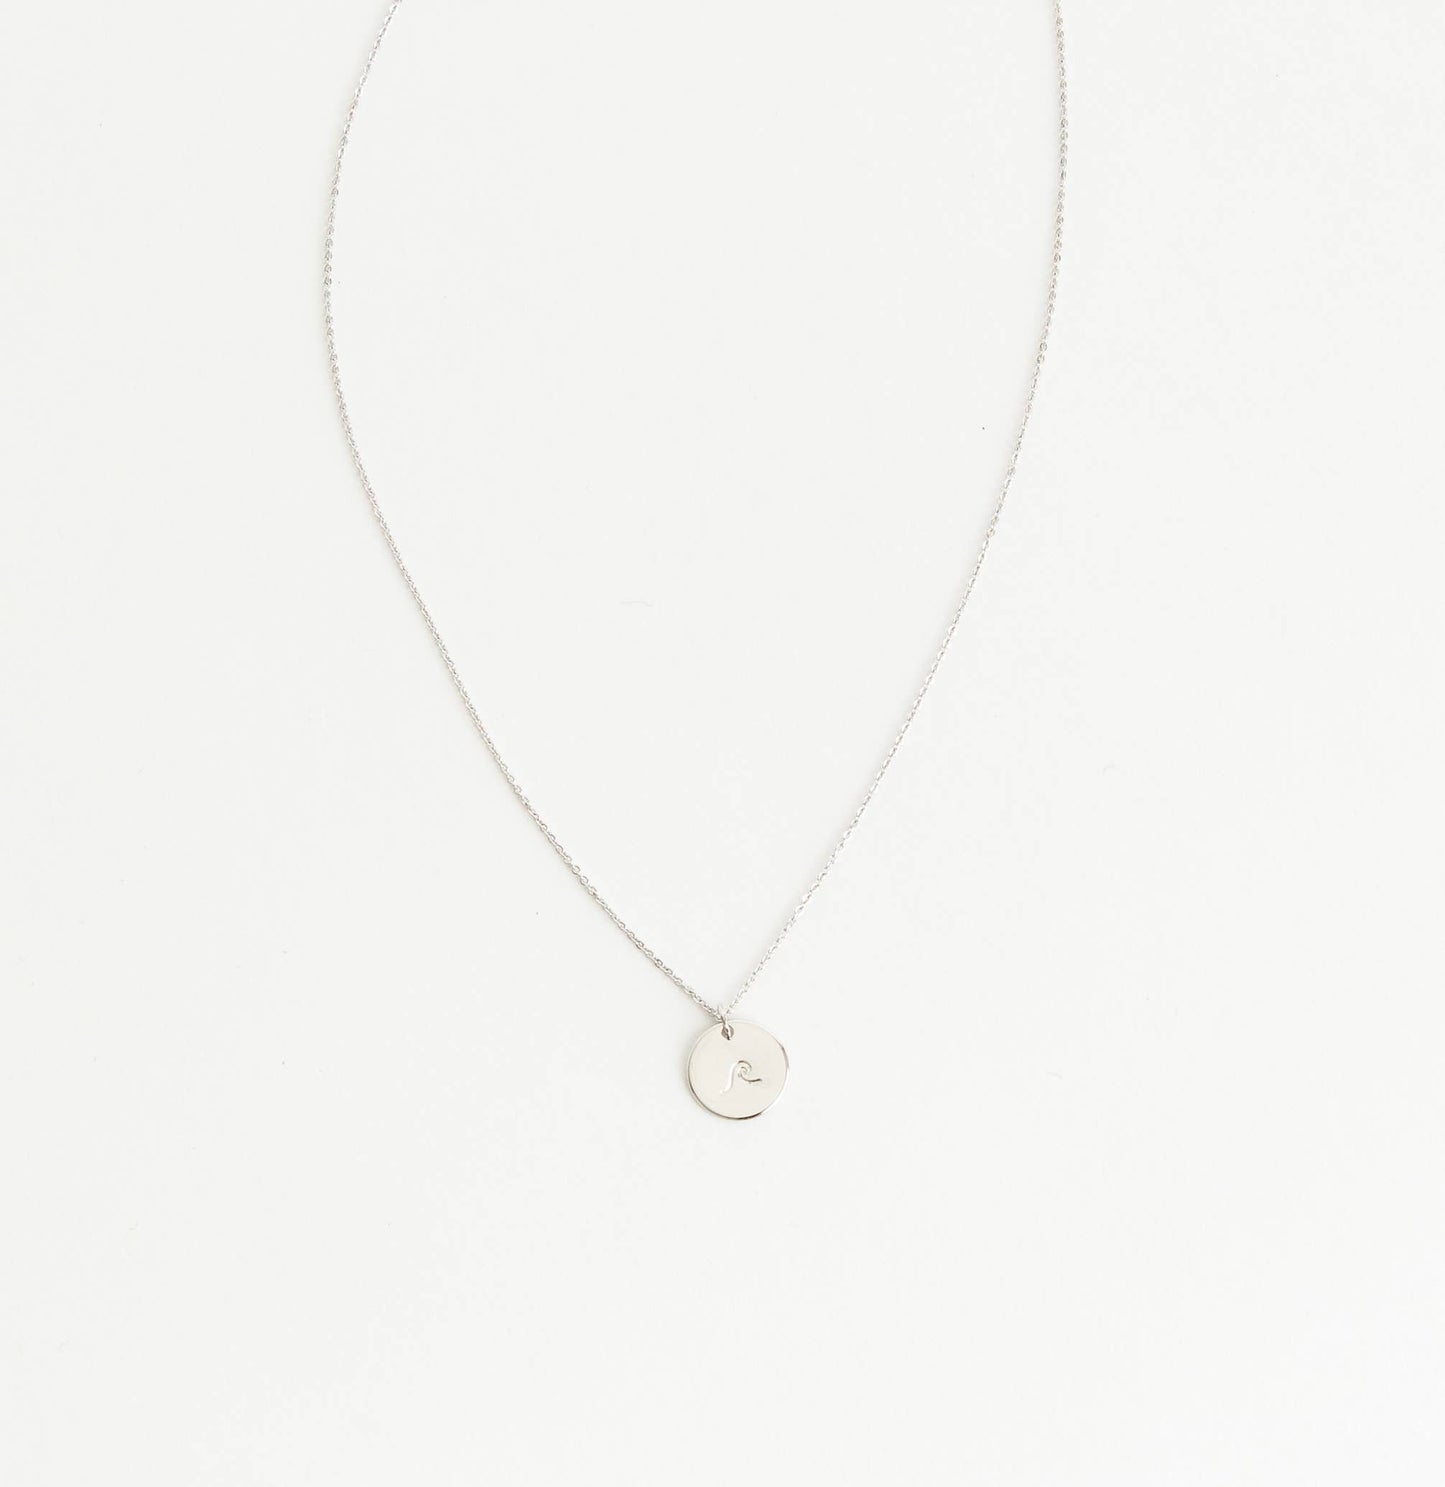 Wave Charm Necklace: Silver Charm / Silver Chain